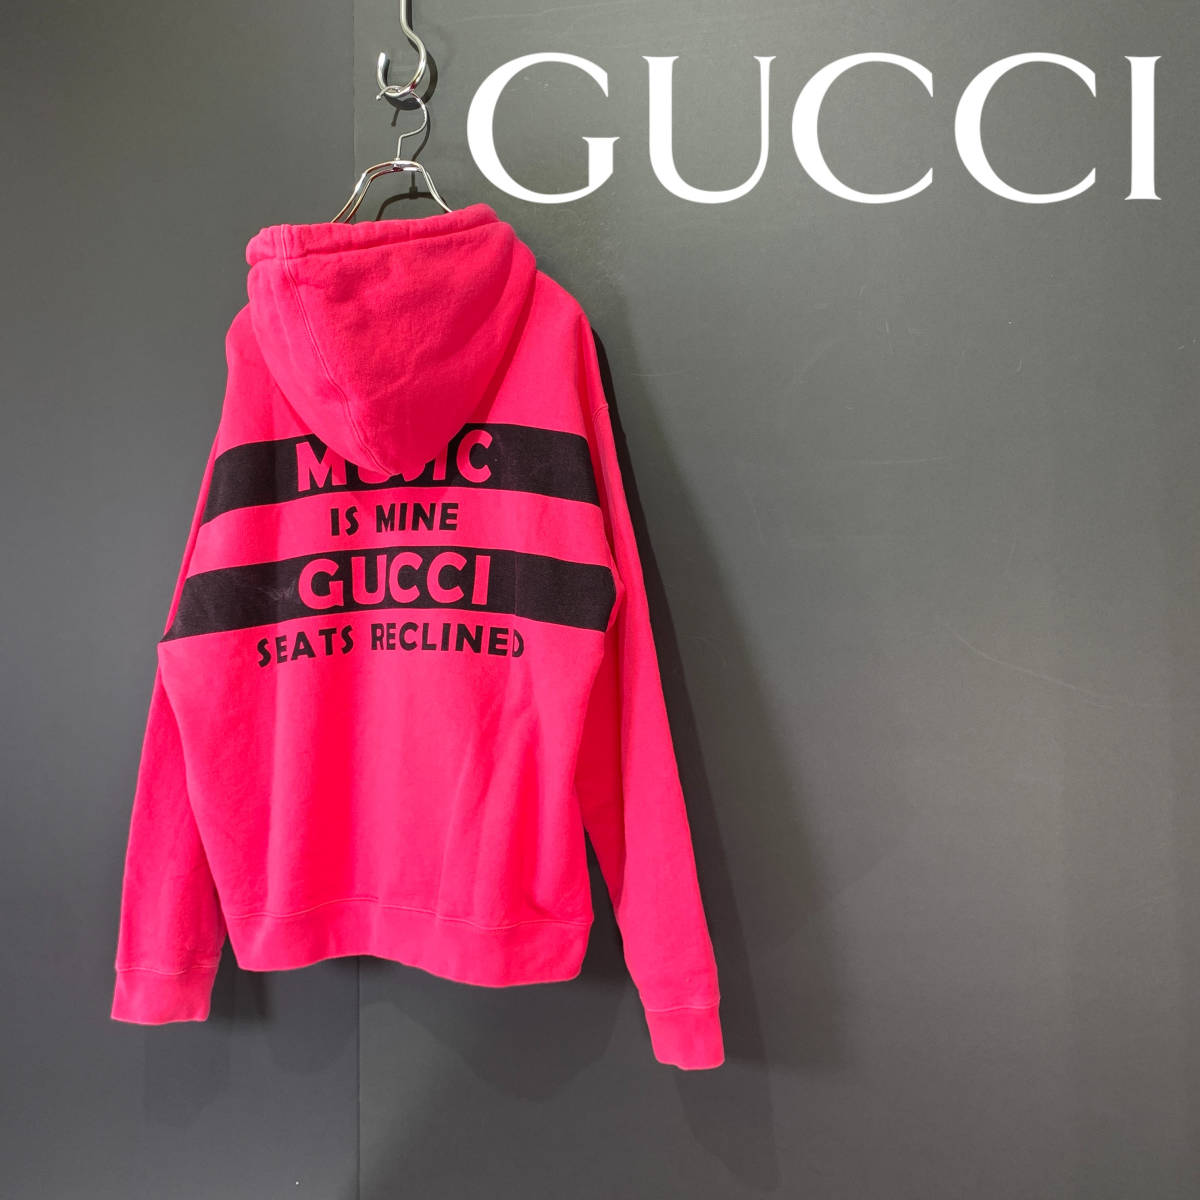 2021SS GUCCI SONY MUSIC IS MINE グッチ 100周年 プリント フーディー パーカー size L 646953 ジャパン表記国内正規品